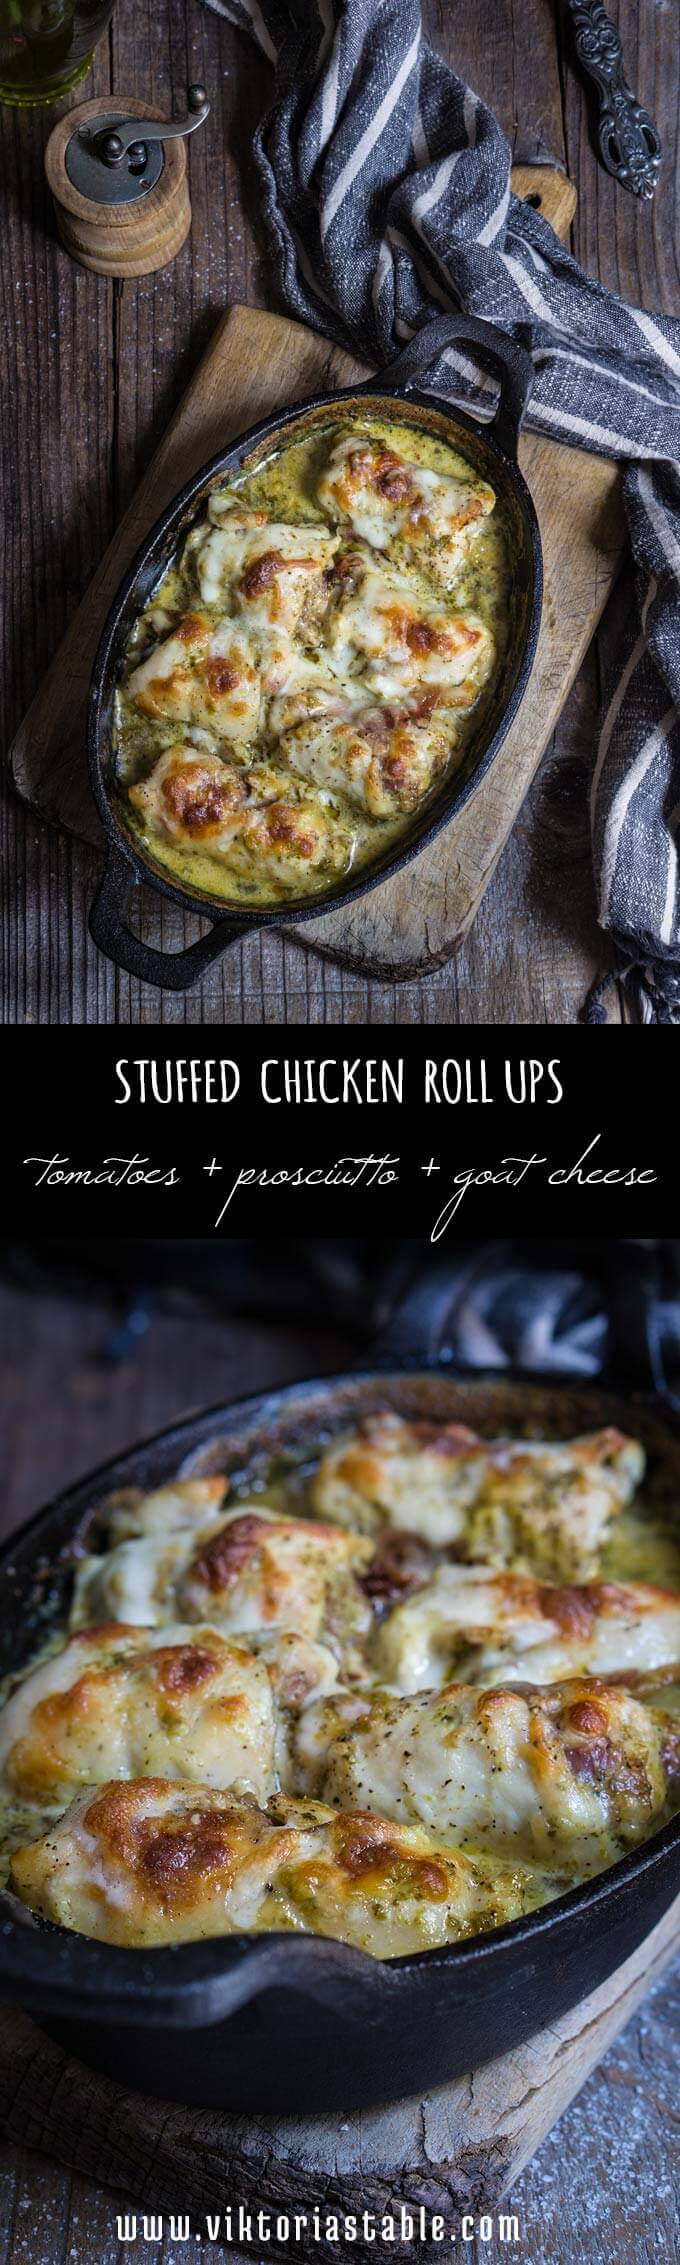 Stuffed chicken roll ups - delicious and easy to make, stuffed with pesto, prosciutto, sun-dried tomatoes and goat cheese, then smothered in creamy garlicky sauce, topped with mozarella, and baked to perfection! | www.viktoriastable.com